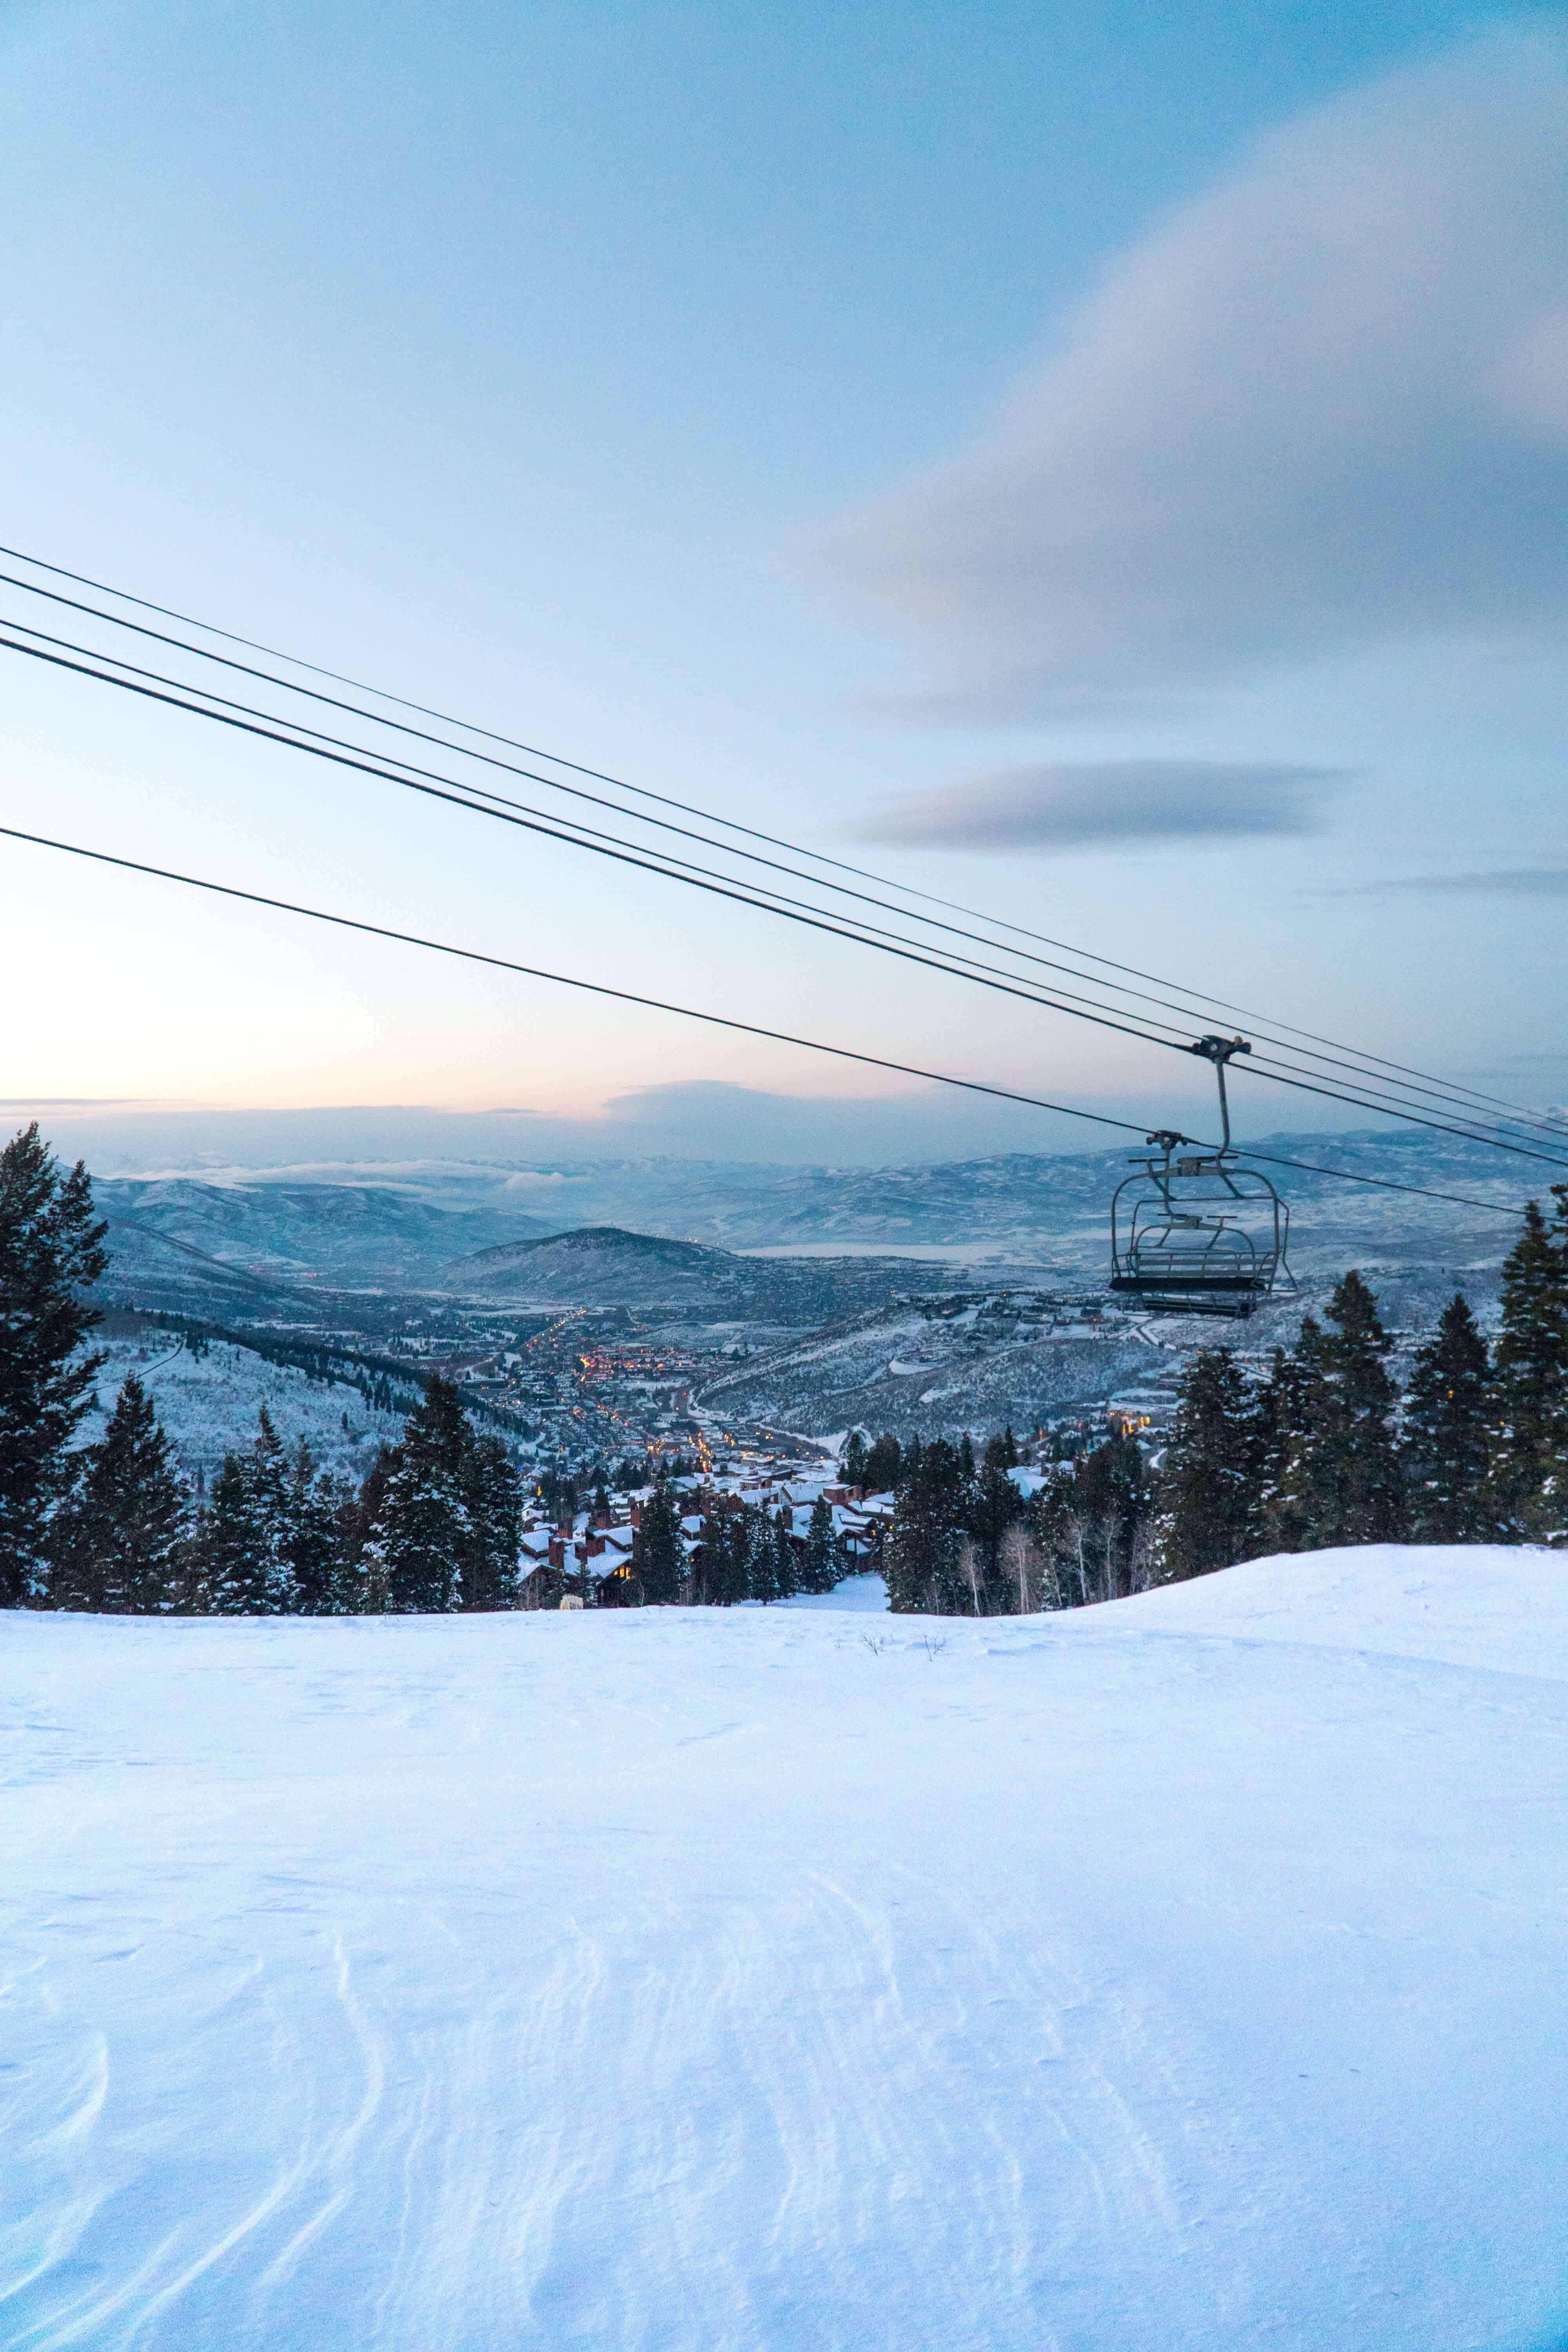 The Ultimate Guide to Park City Utah | The Republic of Rose